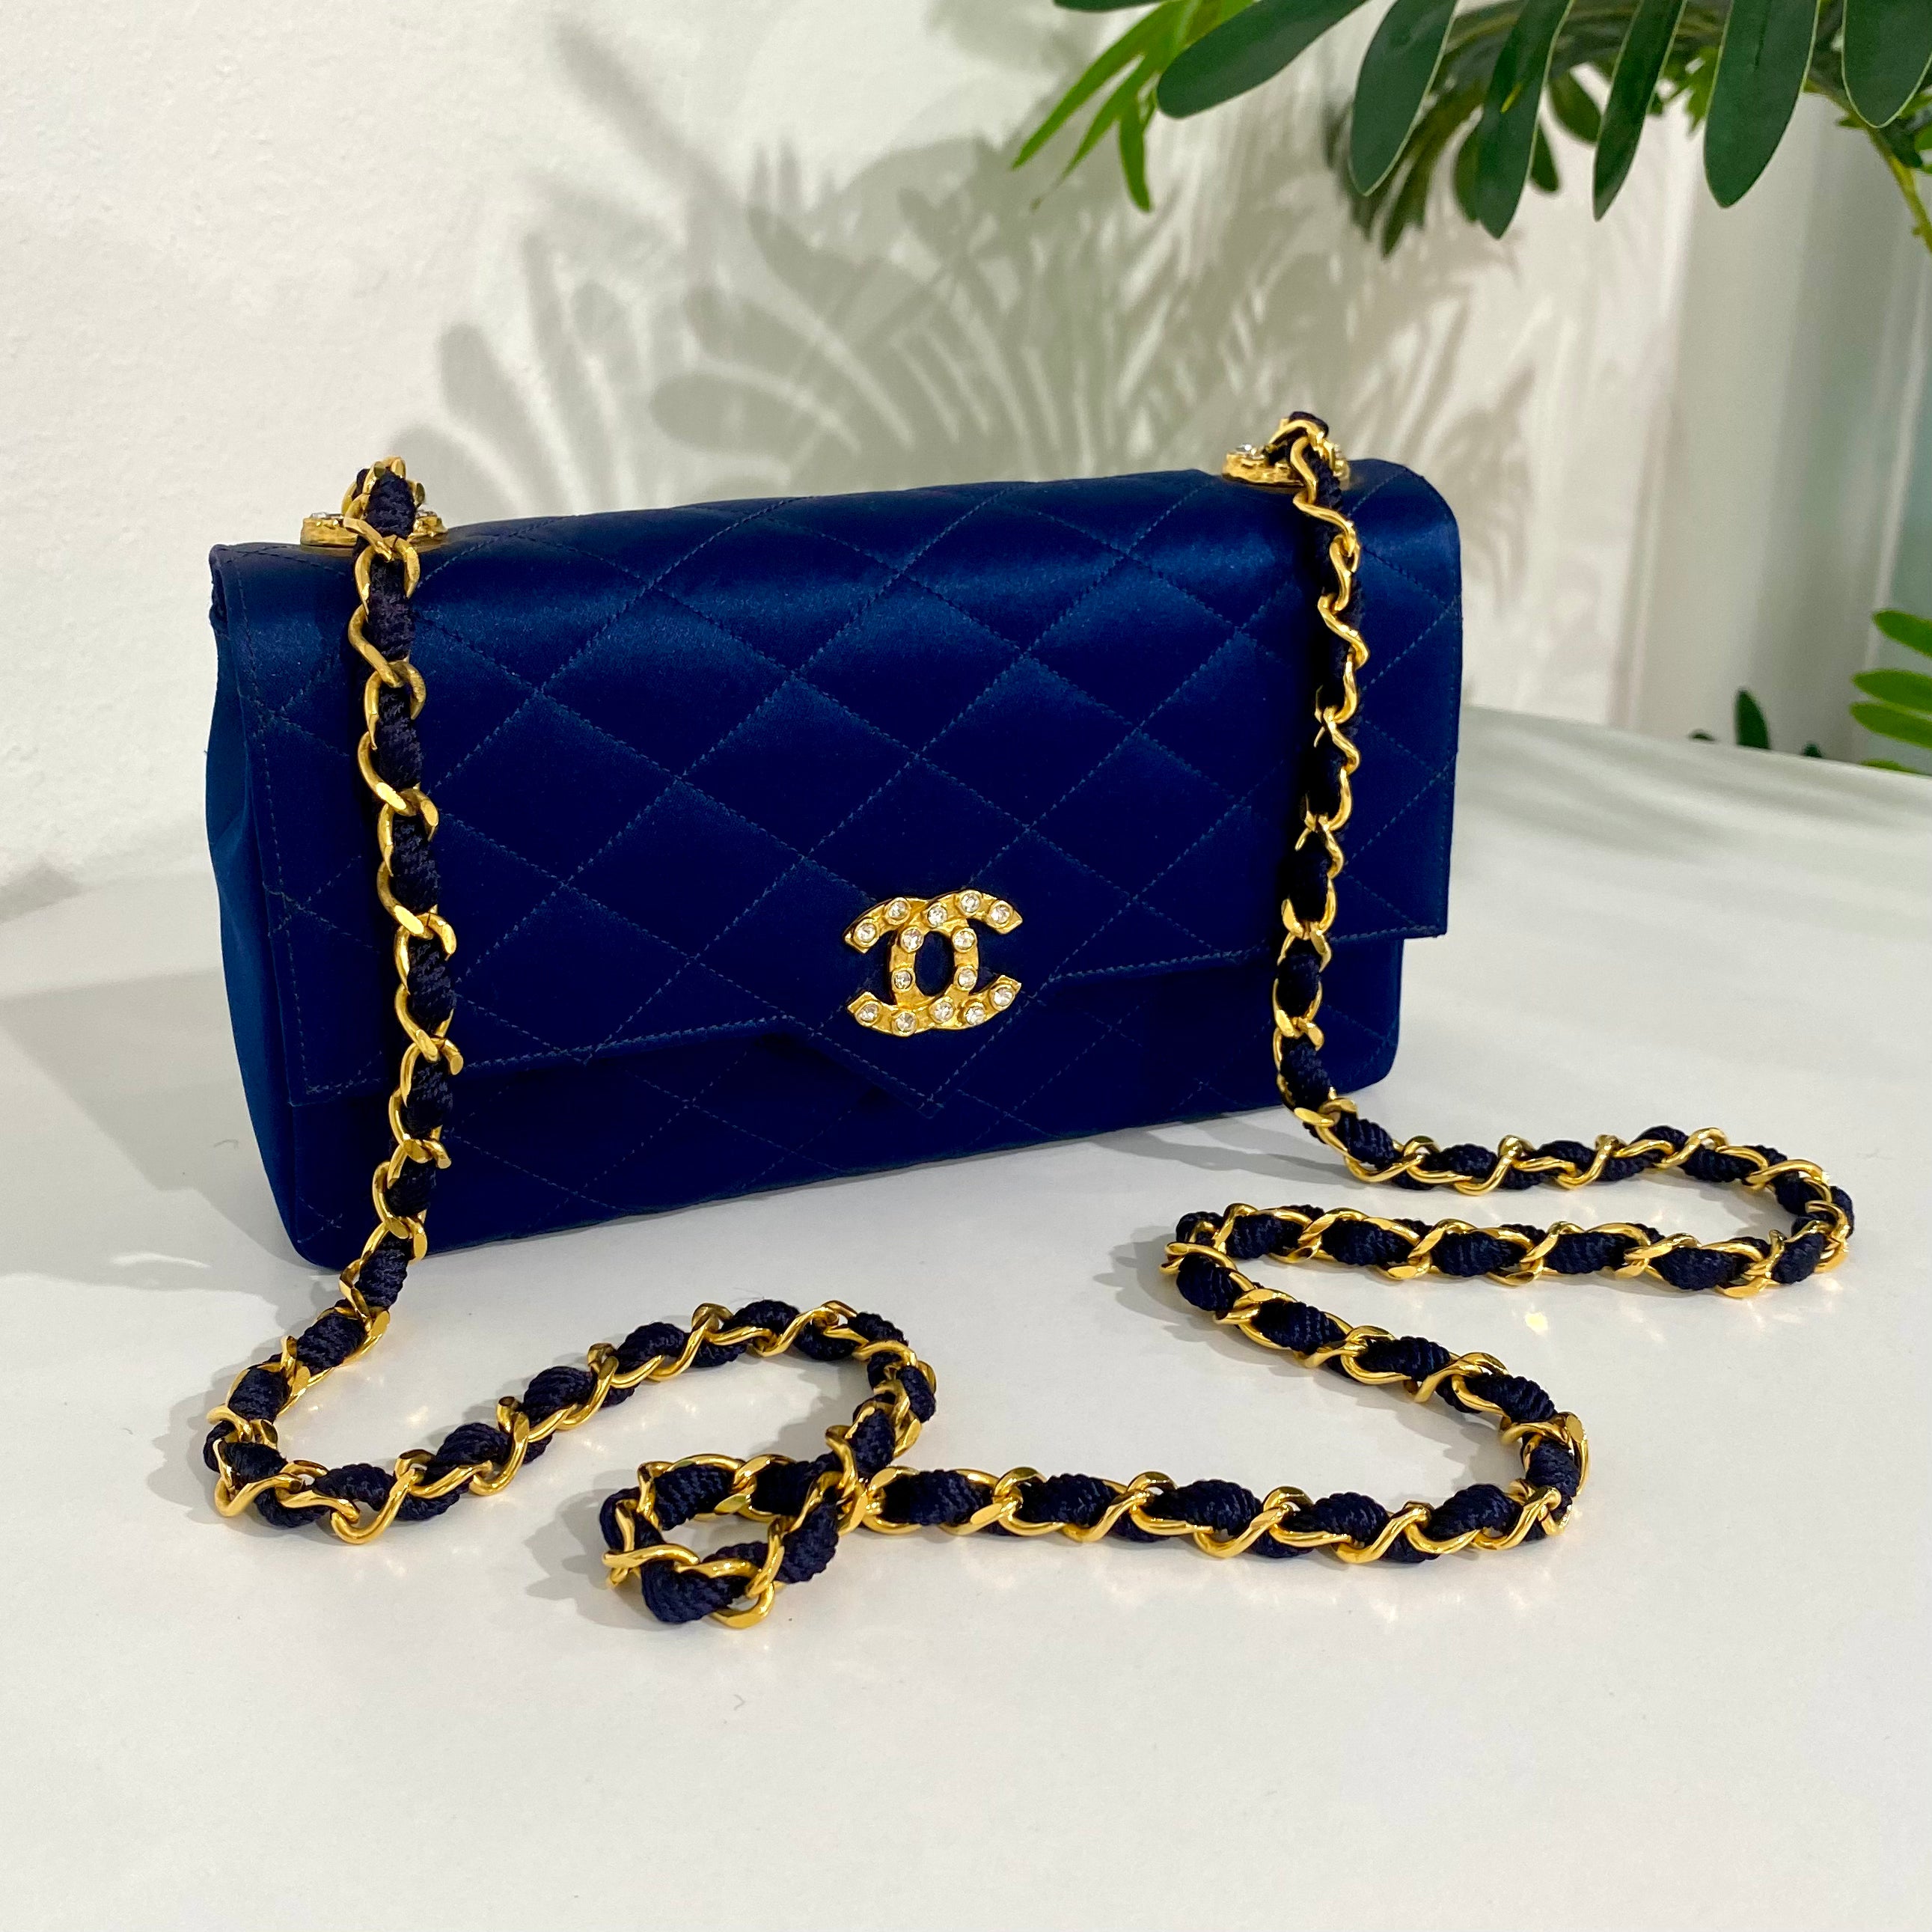 Chanel Accessories AW17: Rocket Bag